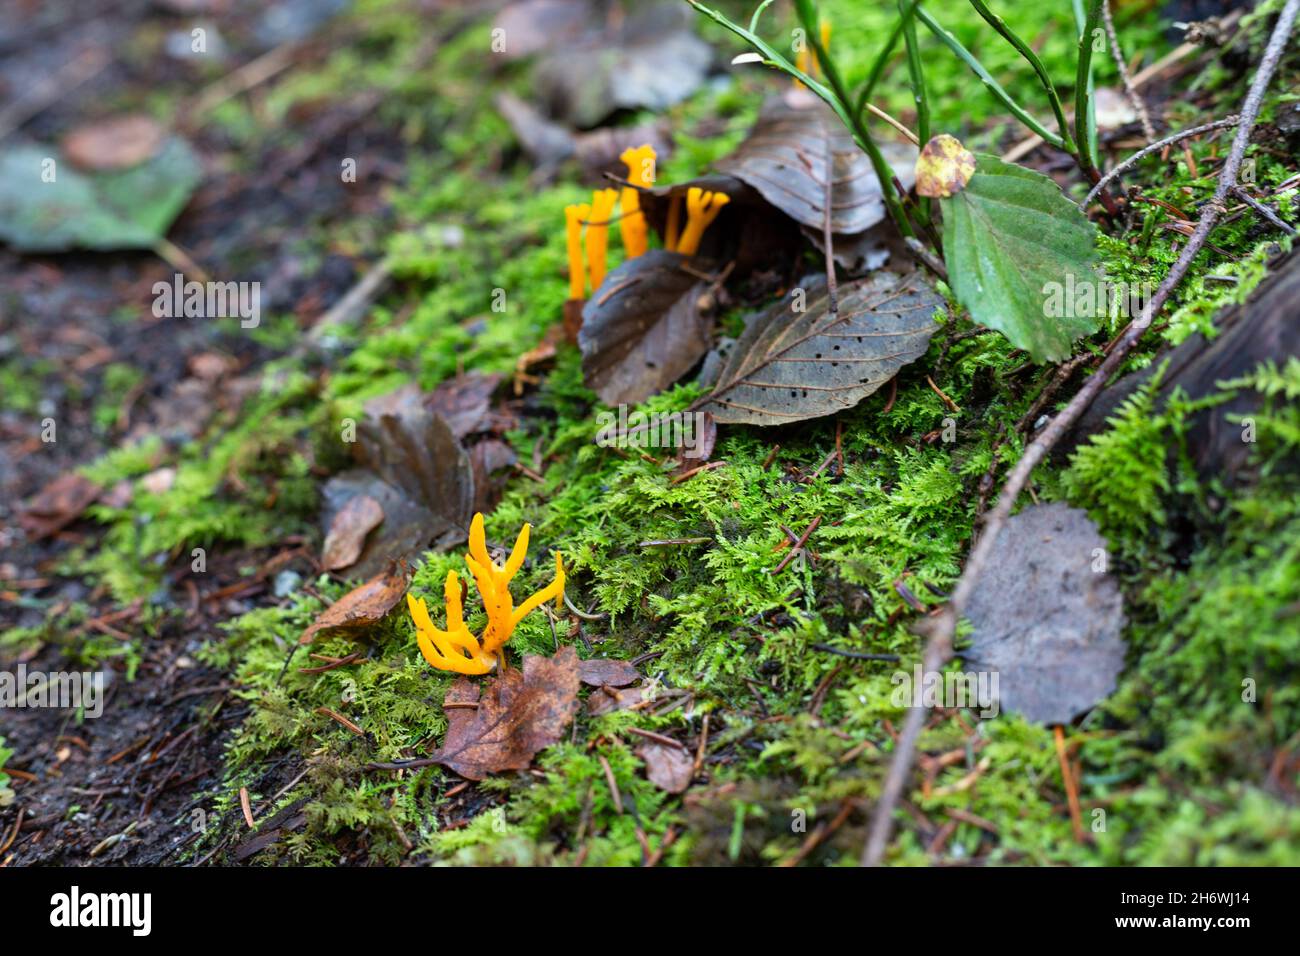 Yellow coral fungi in the forest. Ramaria flava fungus Stock Photo